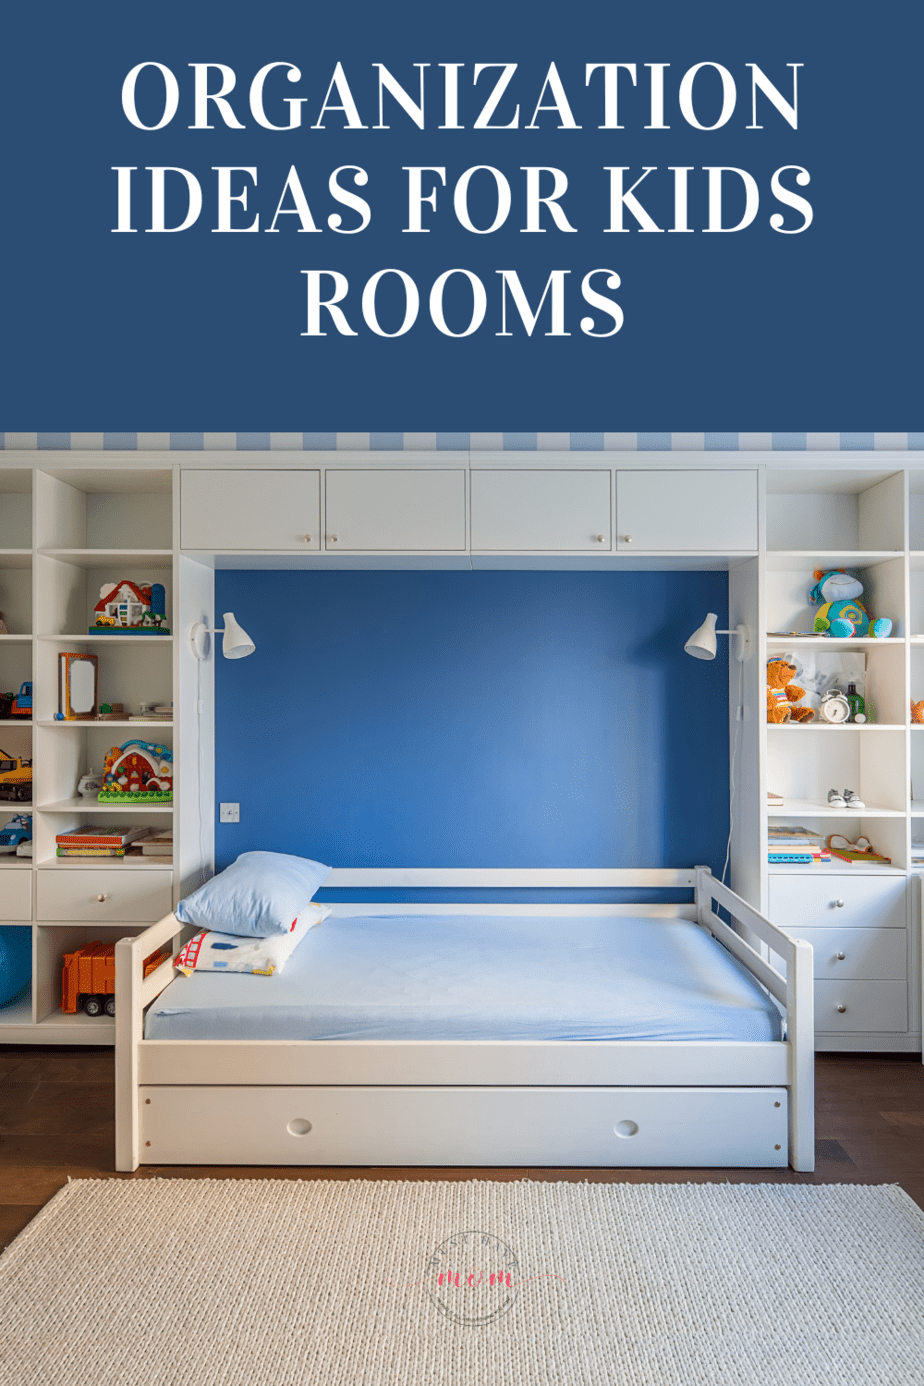 Organization Ideas for Kids Rooms. Sick of the mess in your kids room? These organization ideas for kid's rooms will keep the clutter at bay and create a perfect space for them. #musthavemom #organization #kids #clean